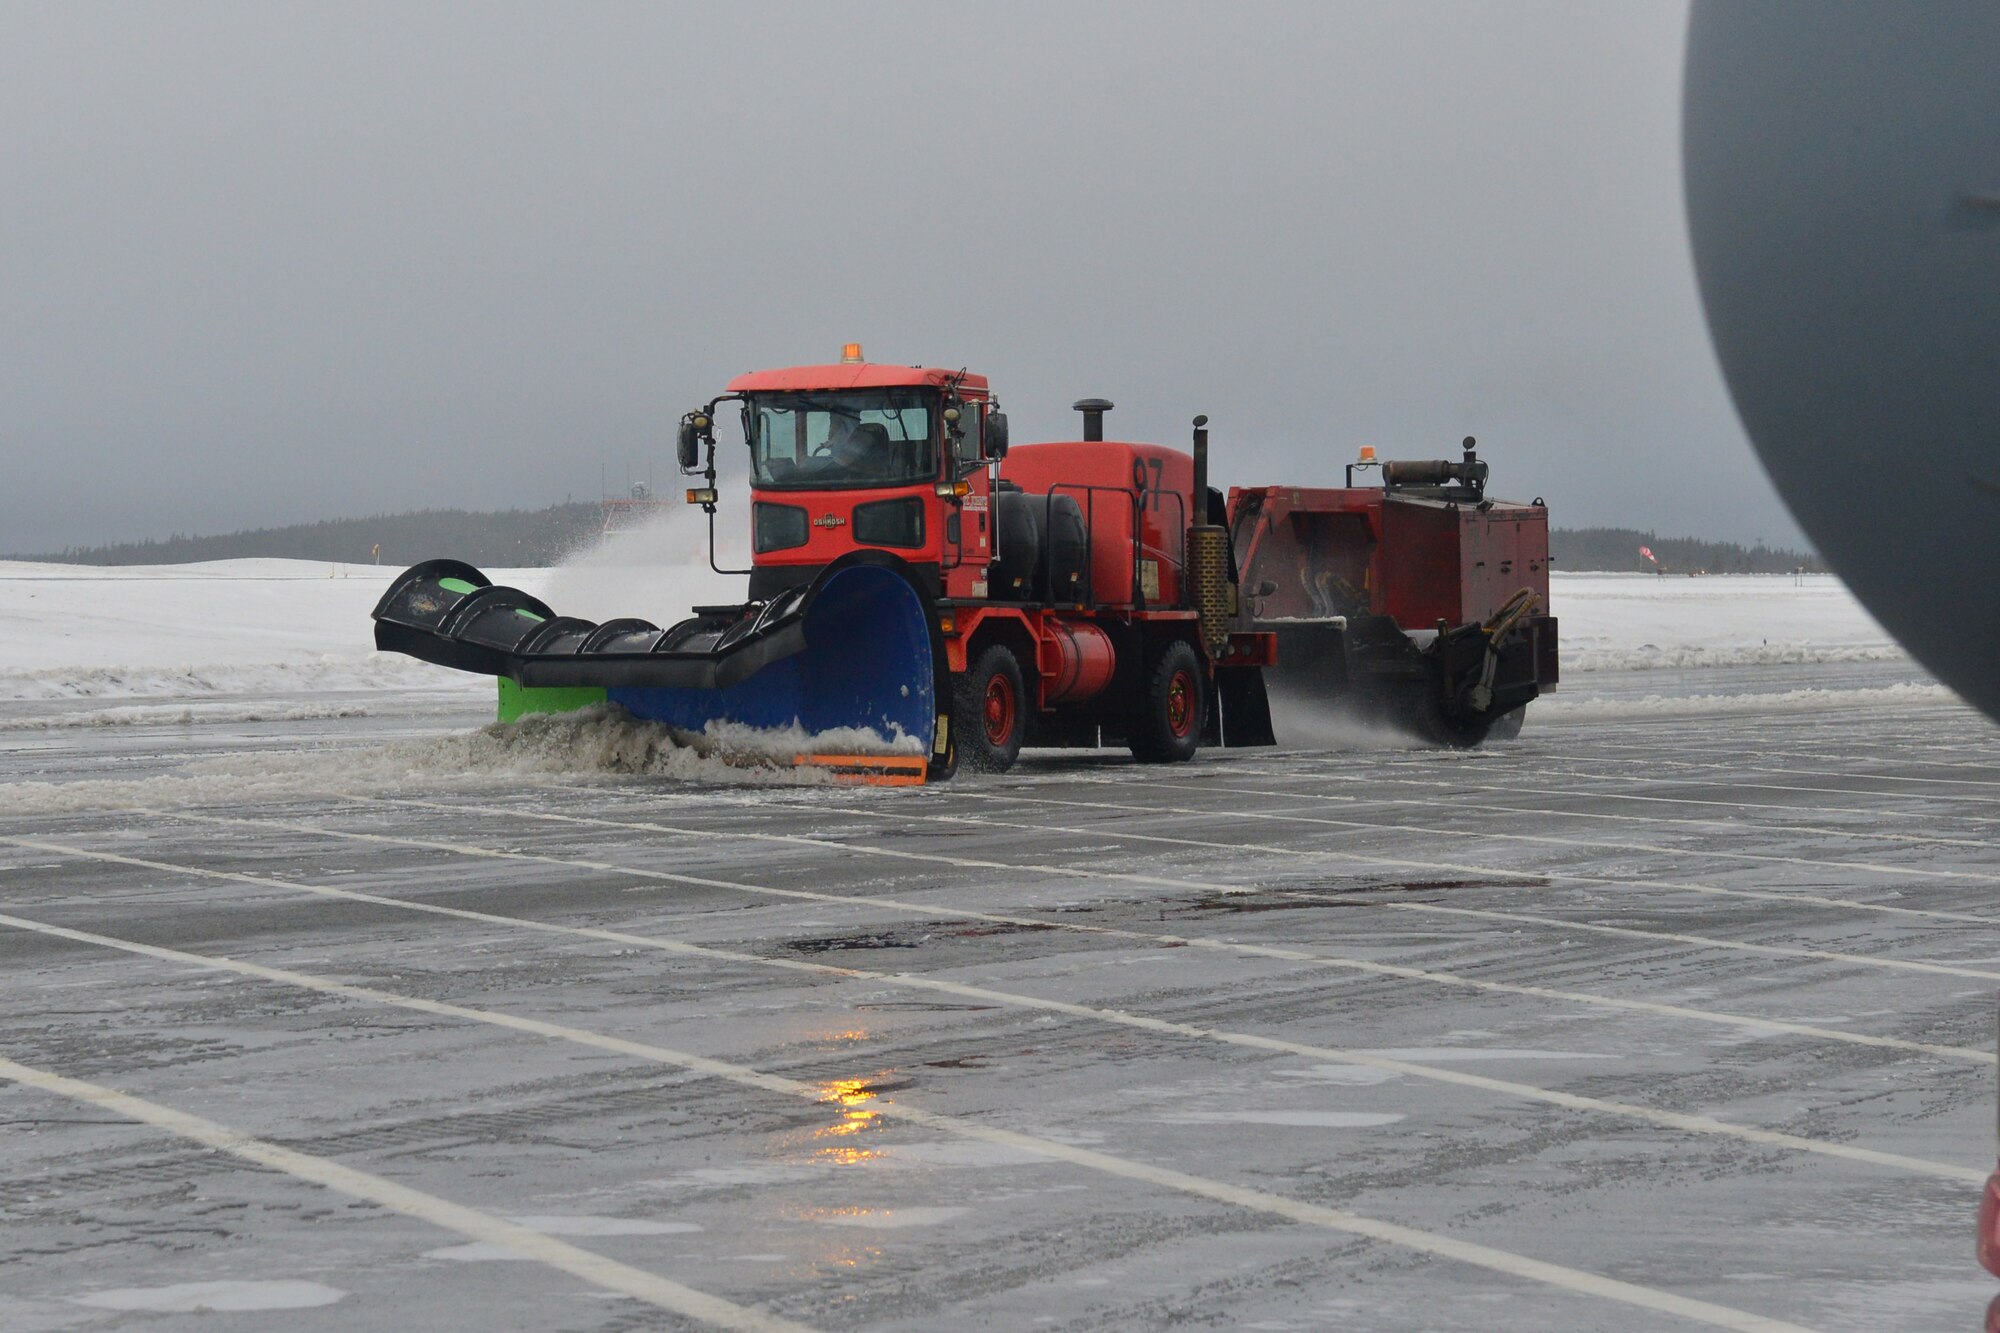 A plower plows ice and snow off a flightline.